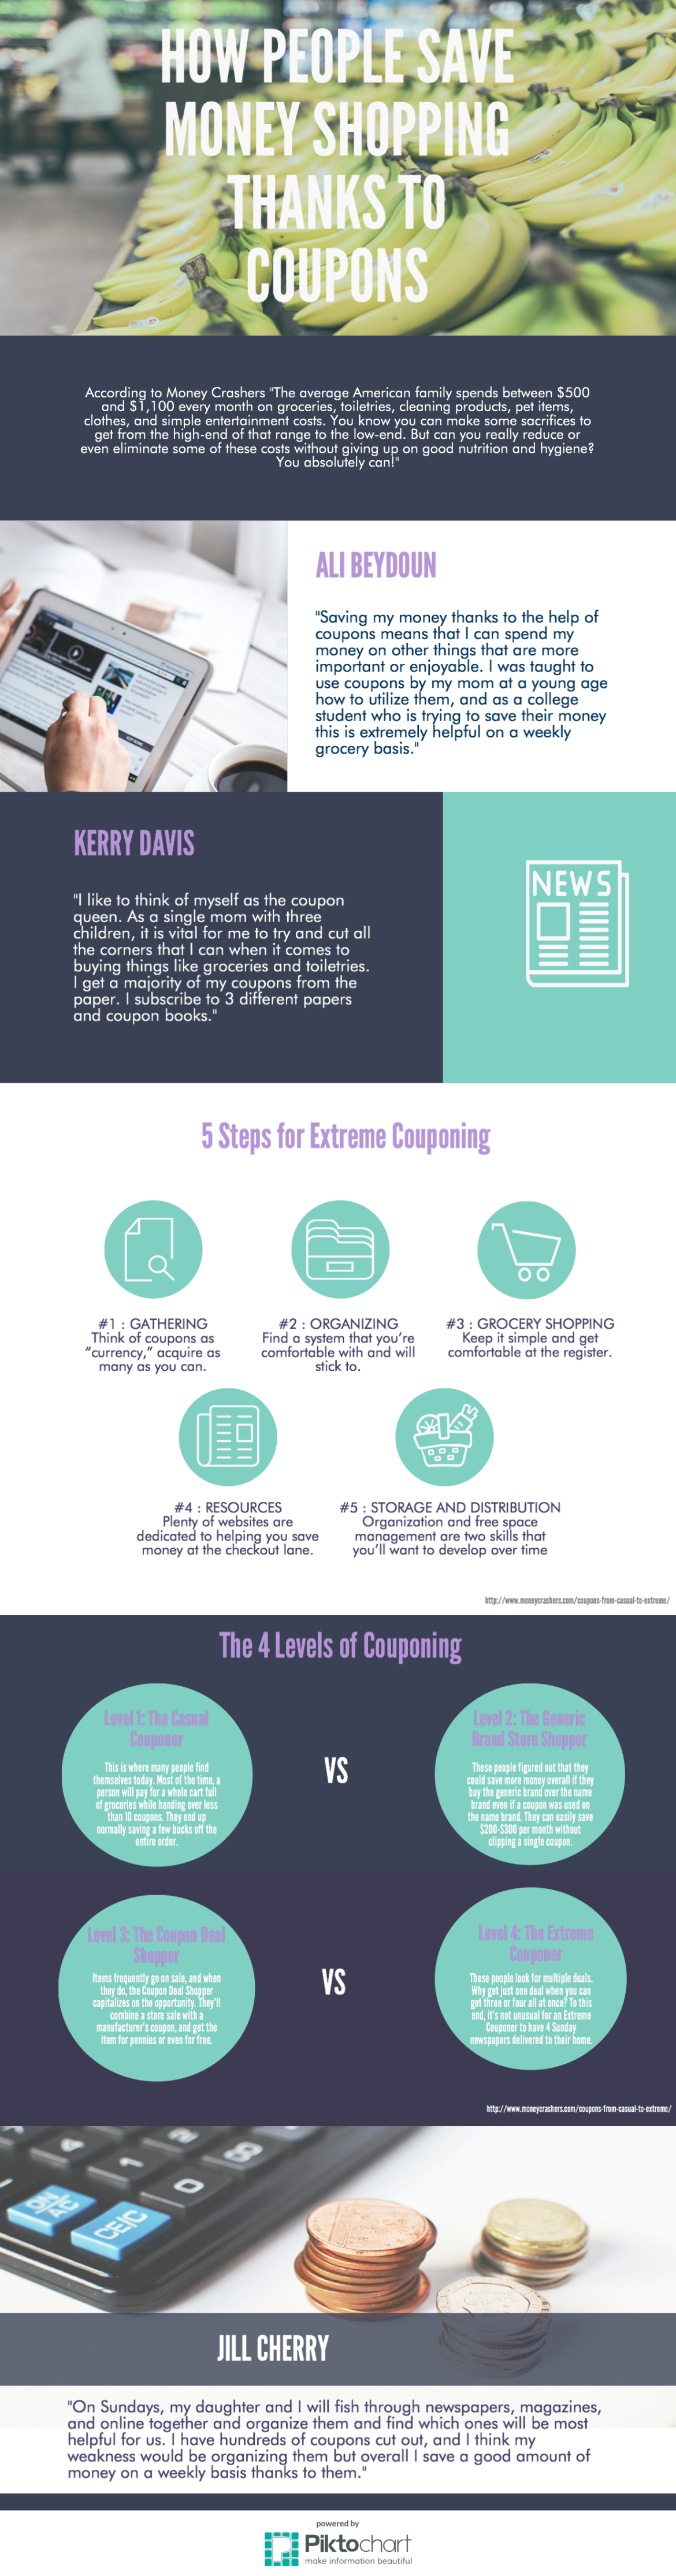 All About The Money Spartan Newsroom - infographic coupons help people keep money